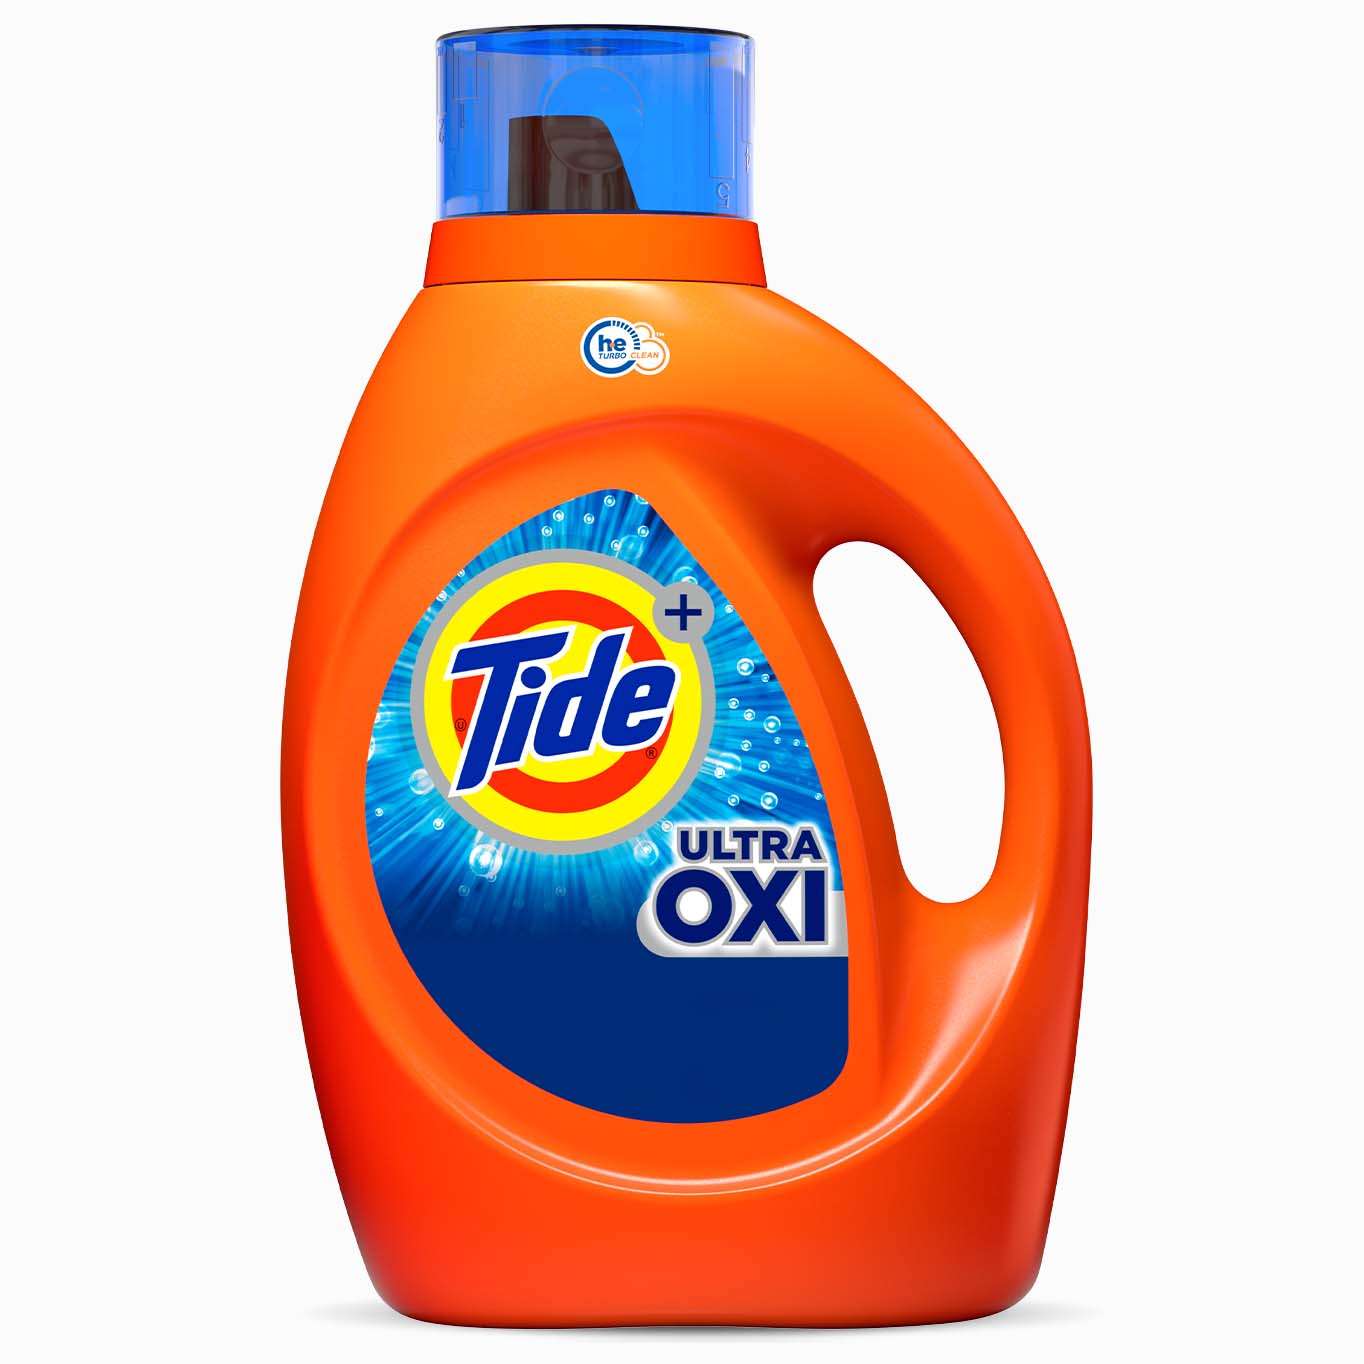 Bloody Clean, laundry detergent